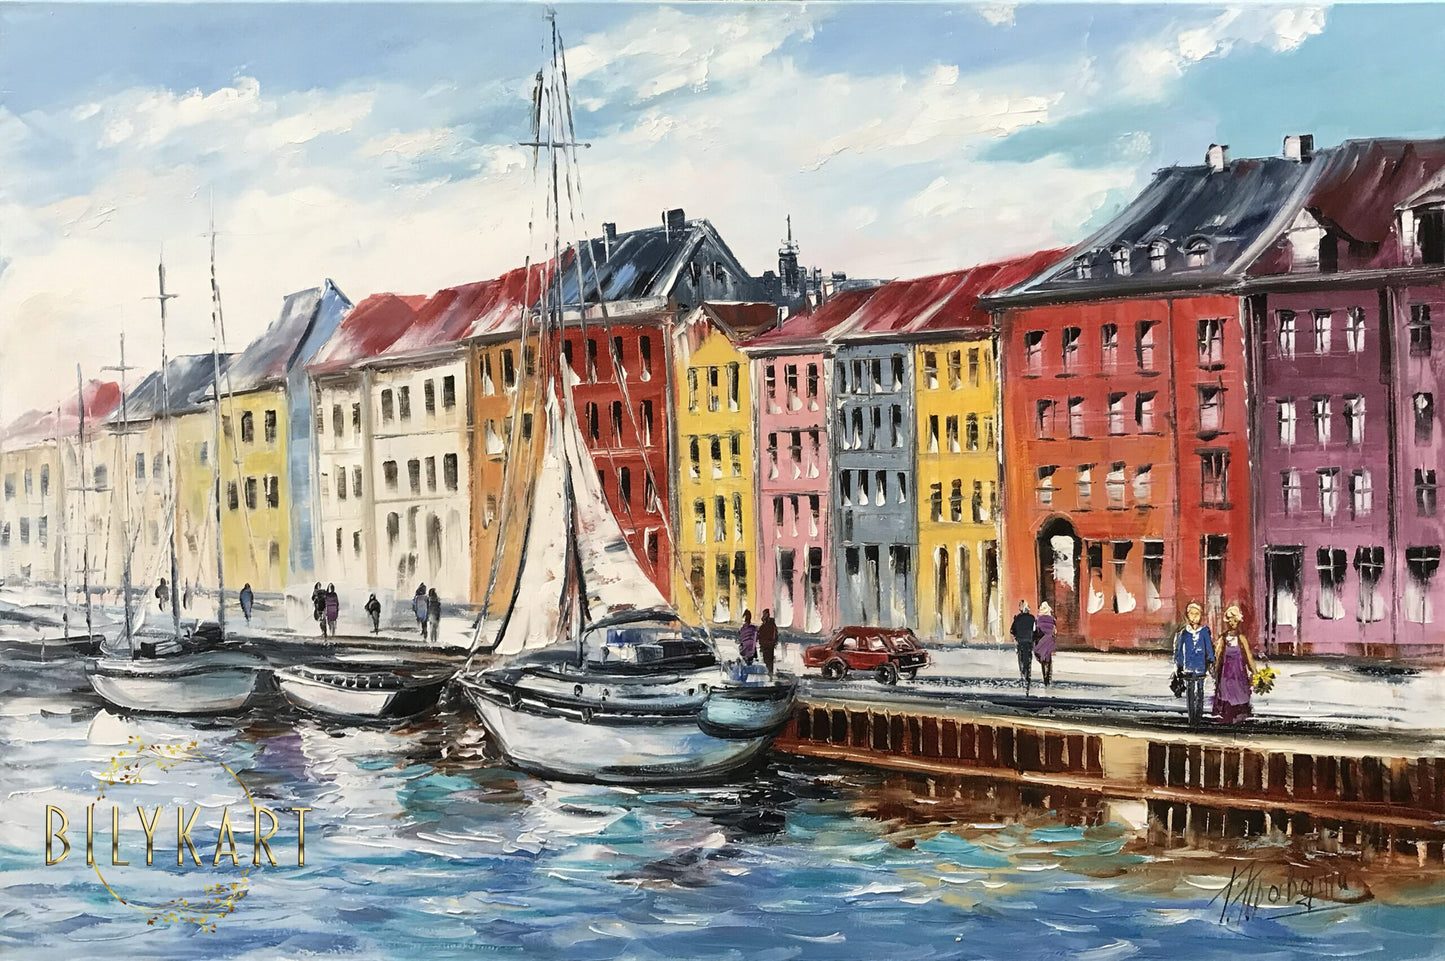 Colorful Copenhagen Painting on Canvas Nyhavn in Denmark Original Oil Painting Yacht Wall Art Denmark Gift Copenhagen Harbour Wall Art